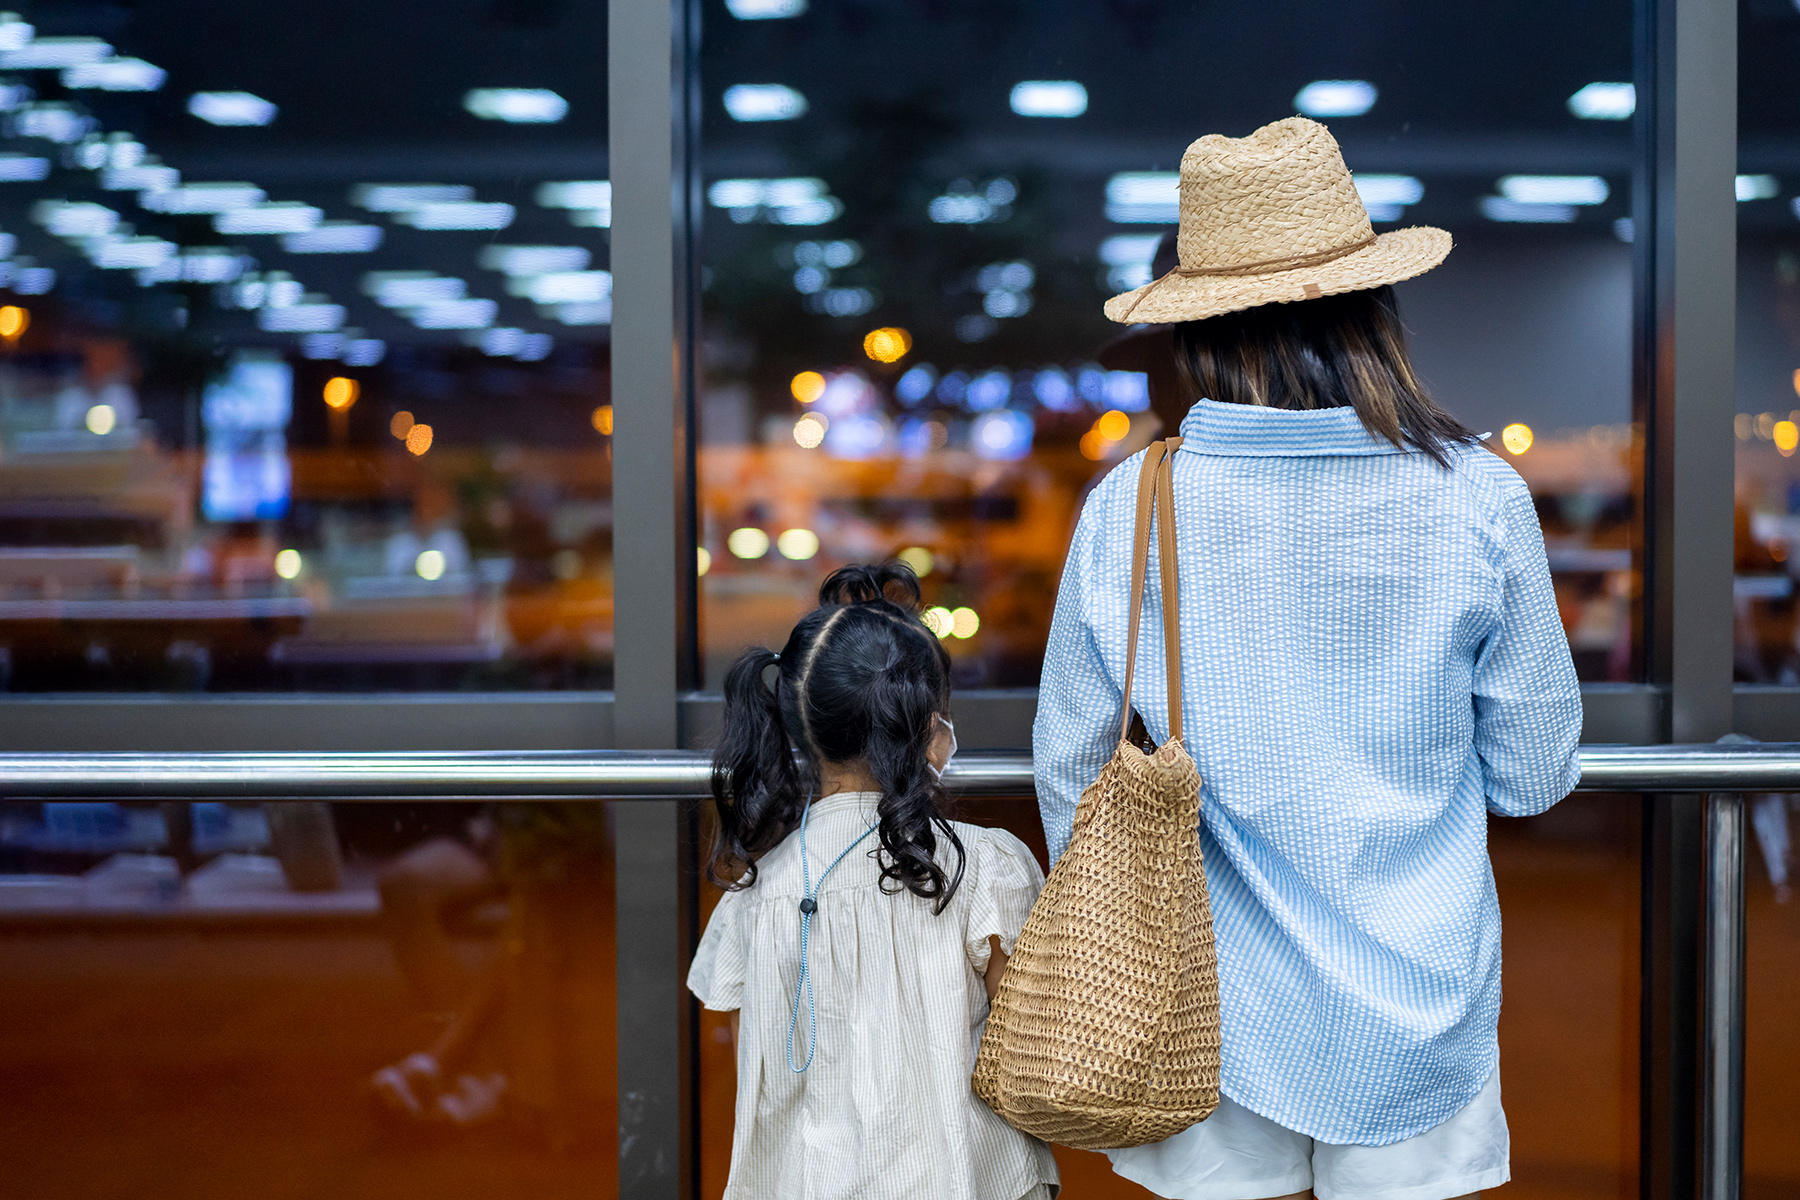 A parent and a child standing at a window in an airport, looking in.